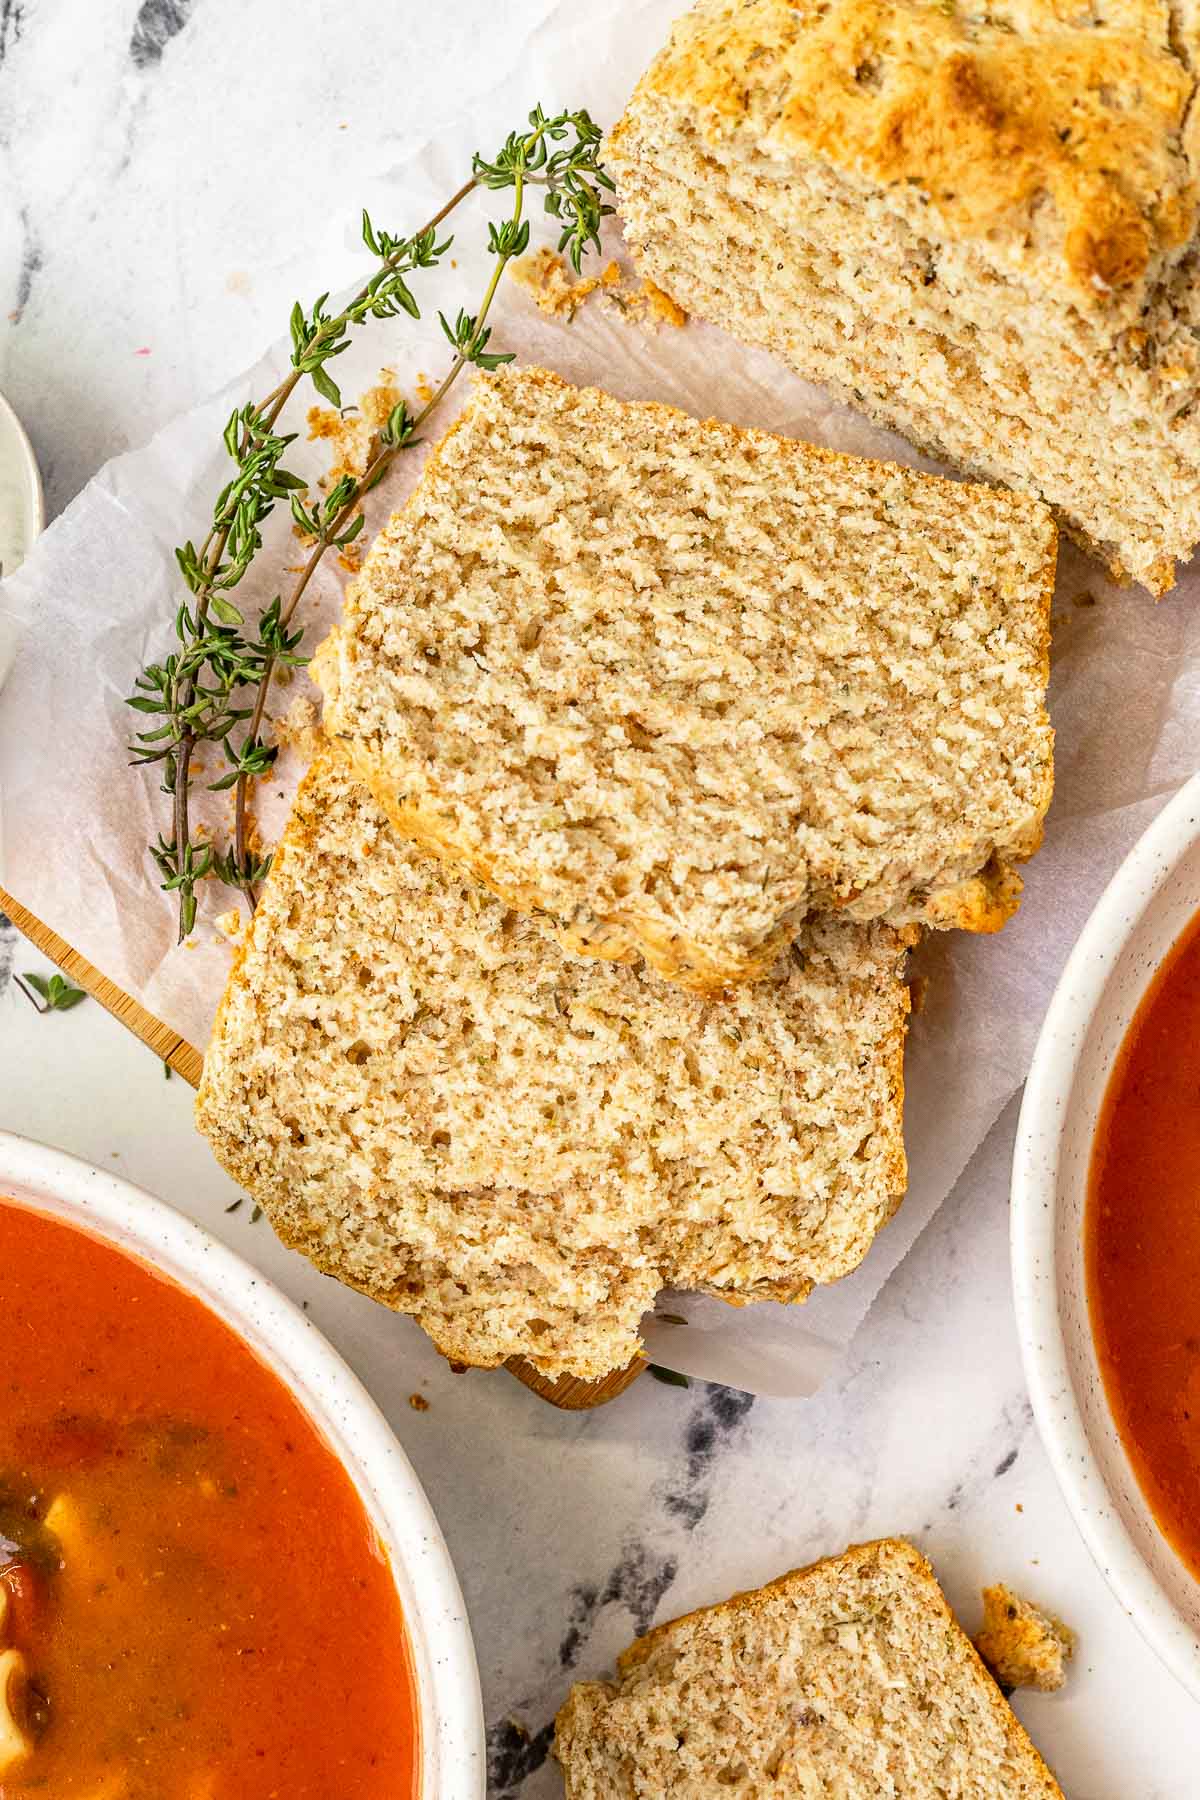 Herb Quick Bread baked bread slices